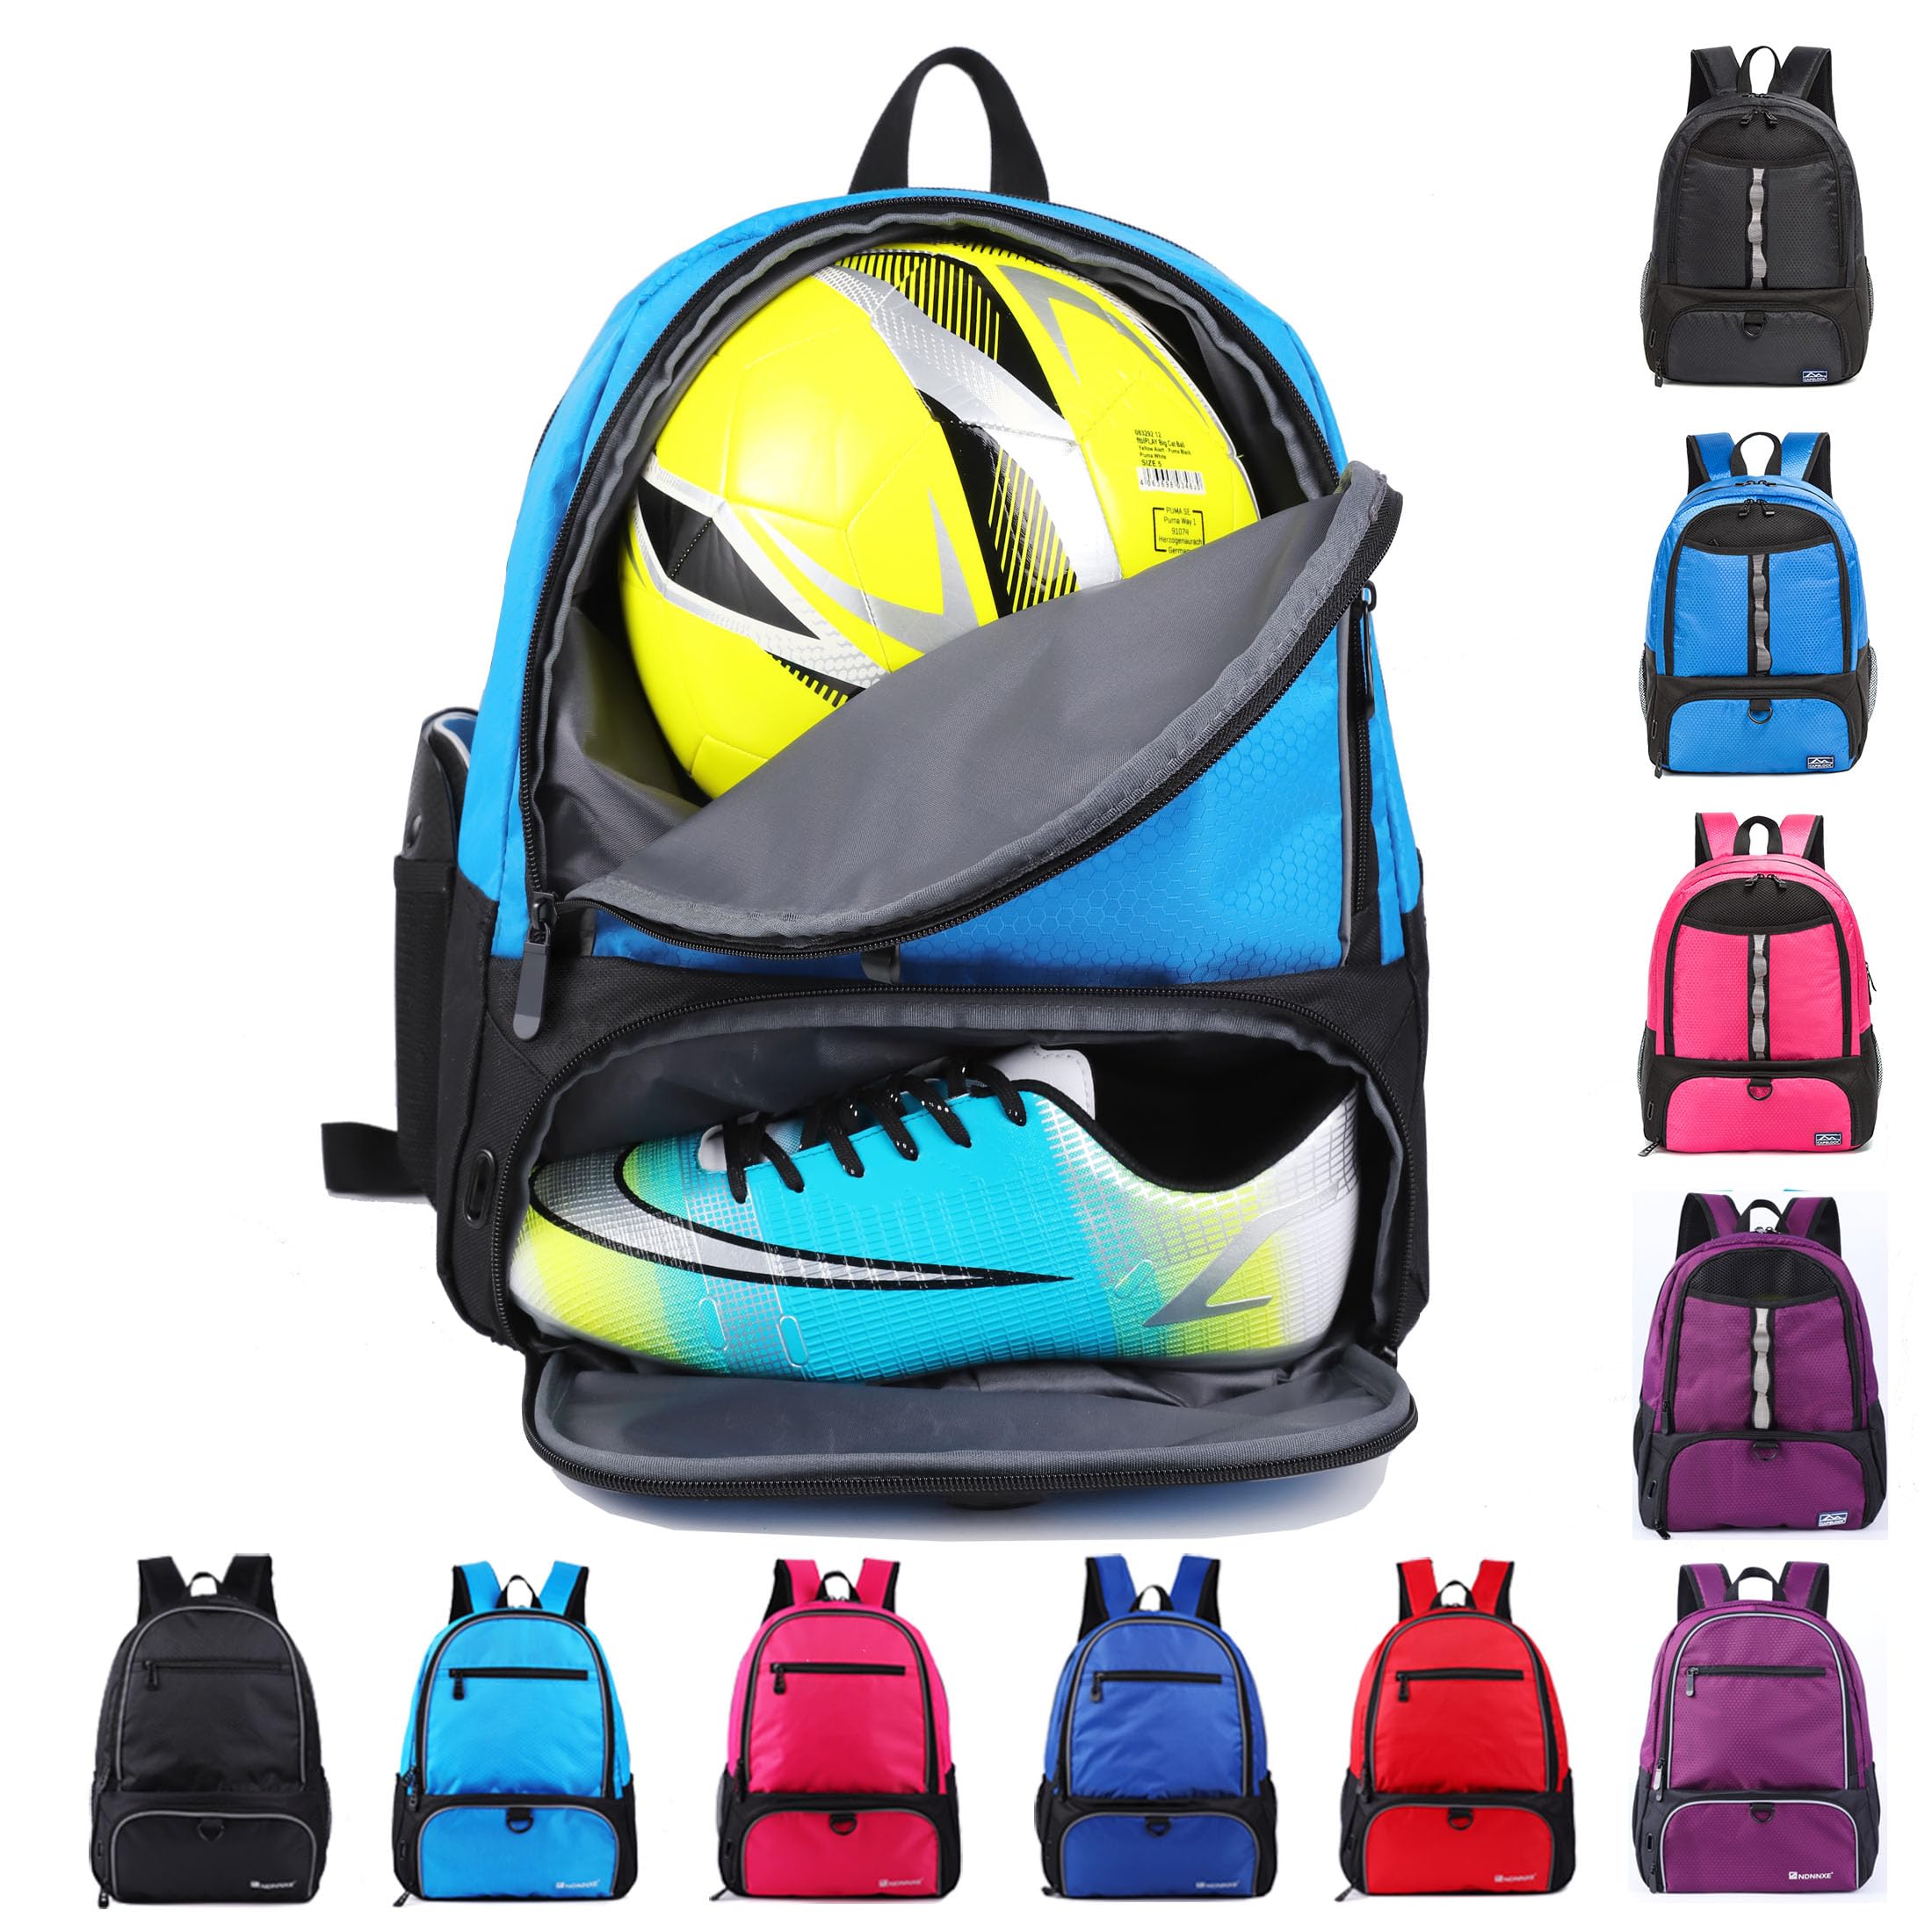 NDNNXE Youth Soccer Bags- Boys Girls Soccer Backpack & Bags for Basketball, Volleyball & Football with Ball Compartment -All Spo